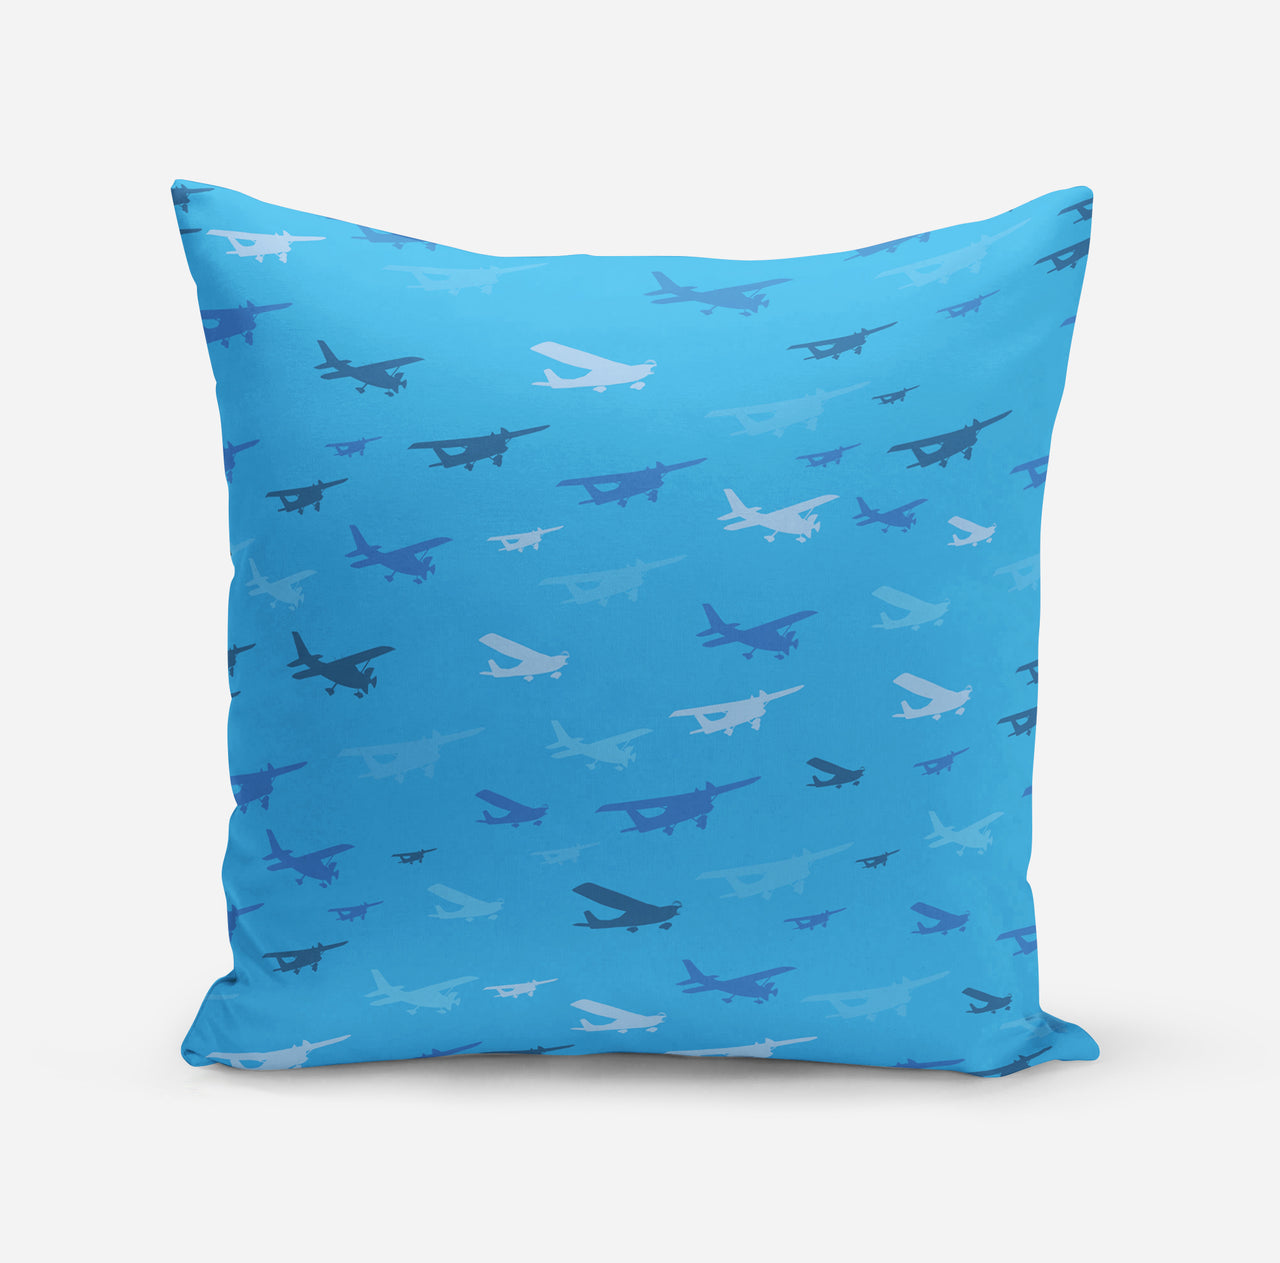 Many Propellers Designed Pillows